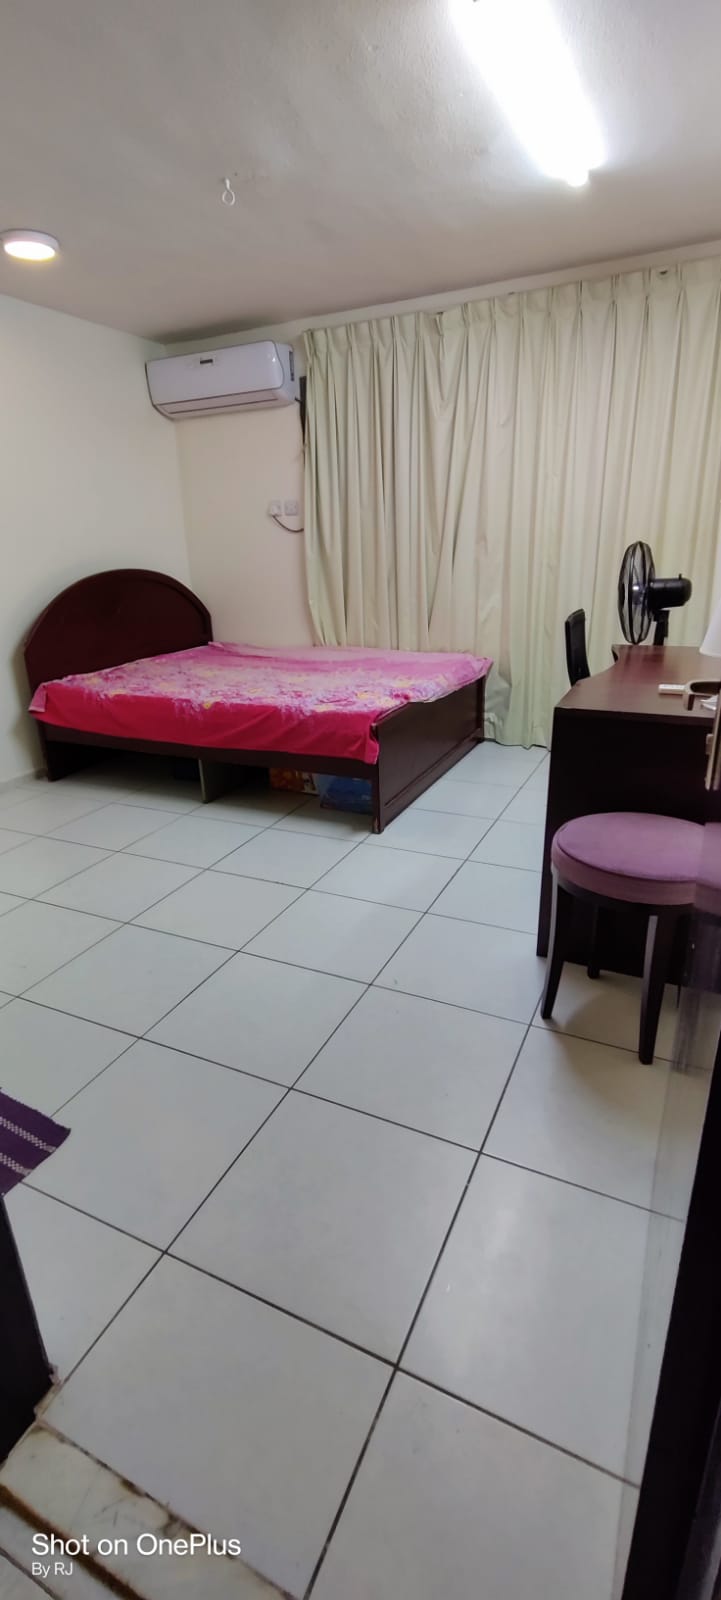 Karama Prime Location With Attached Bath And Balcony Fully Furnished Room Available